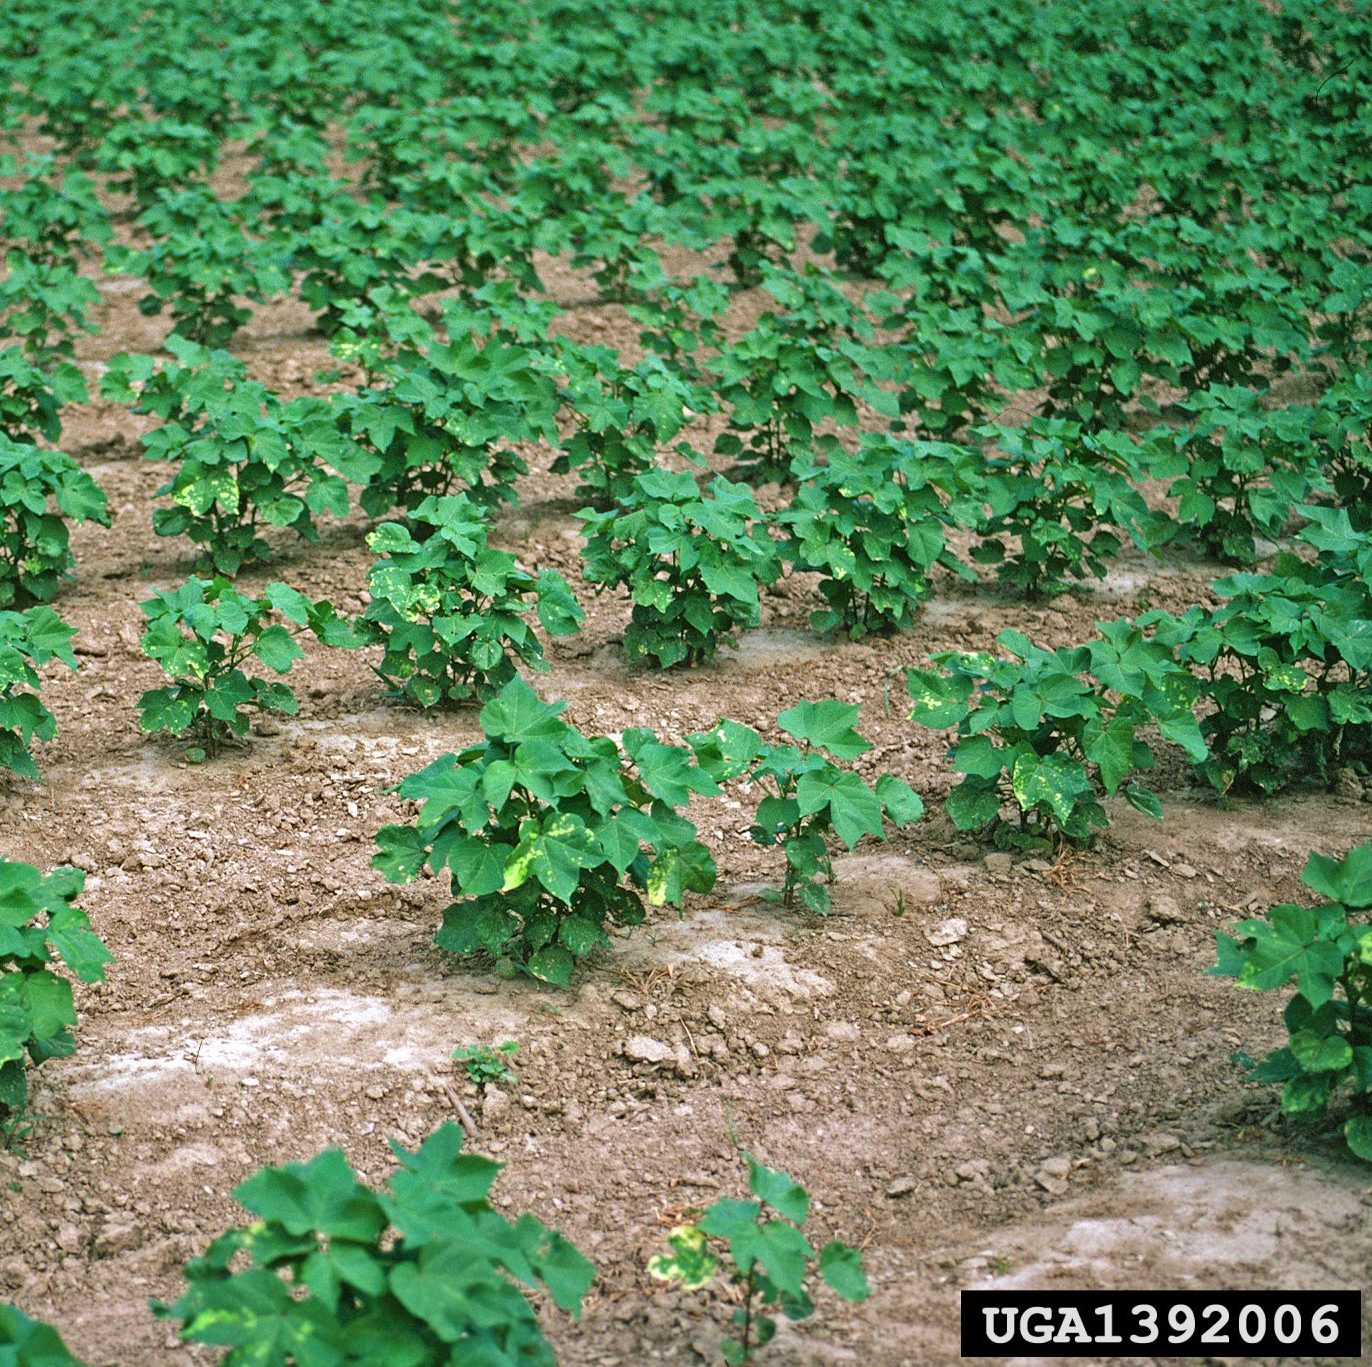 Image of a Cotton Field, Agricultural Crop